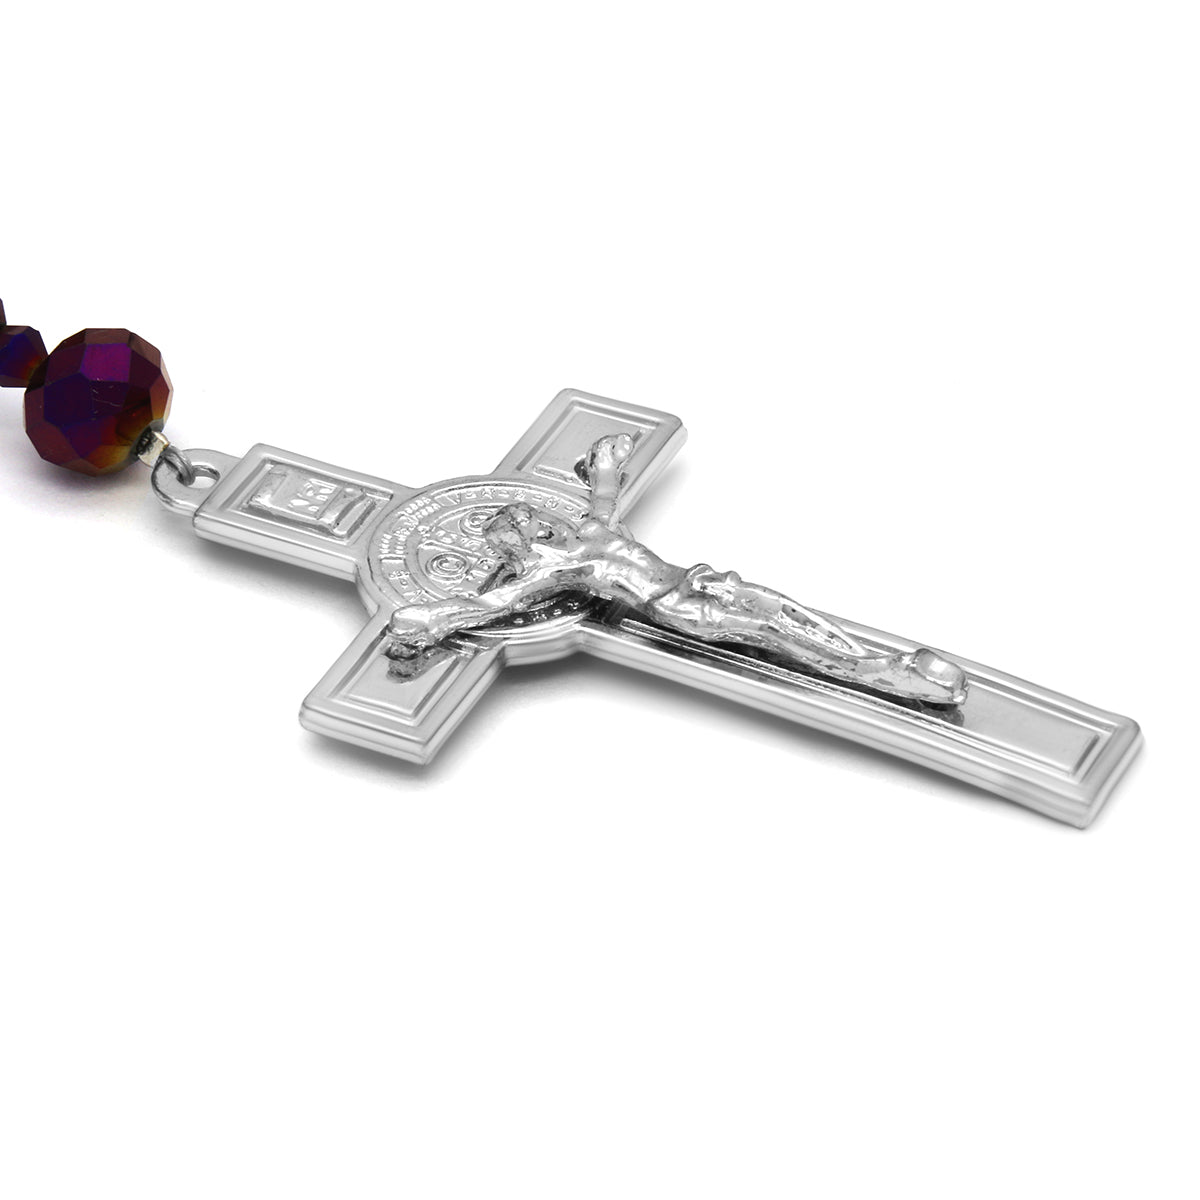 Purple Crystal Line Rosary With Cross Pendant